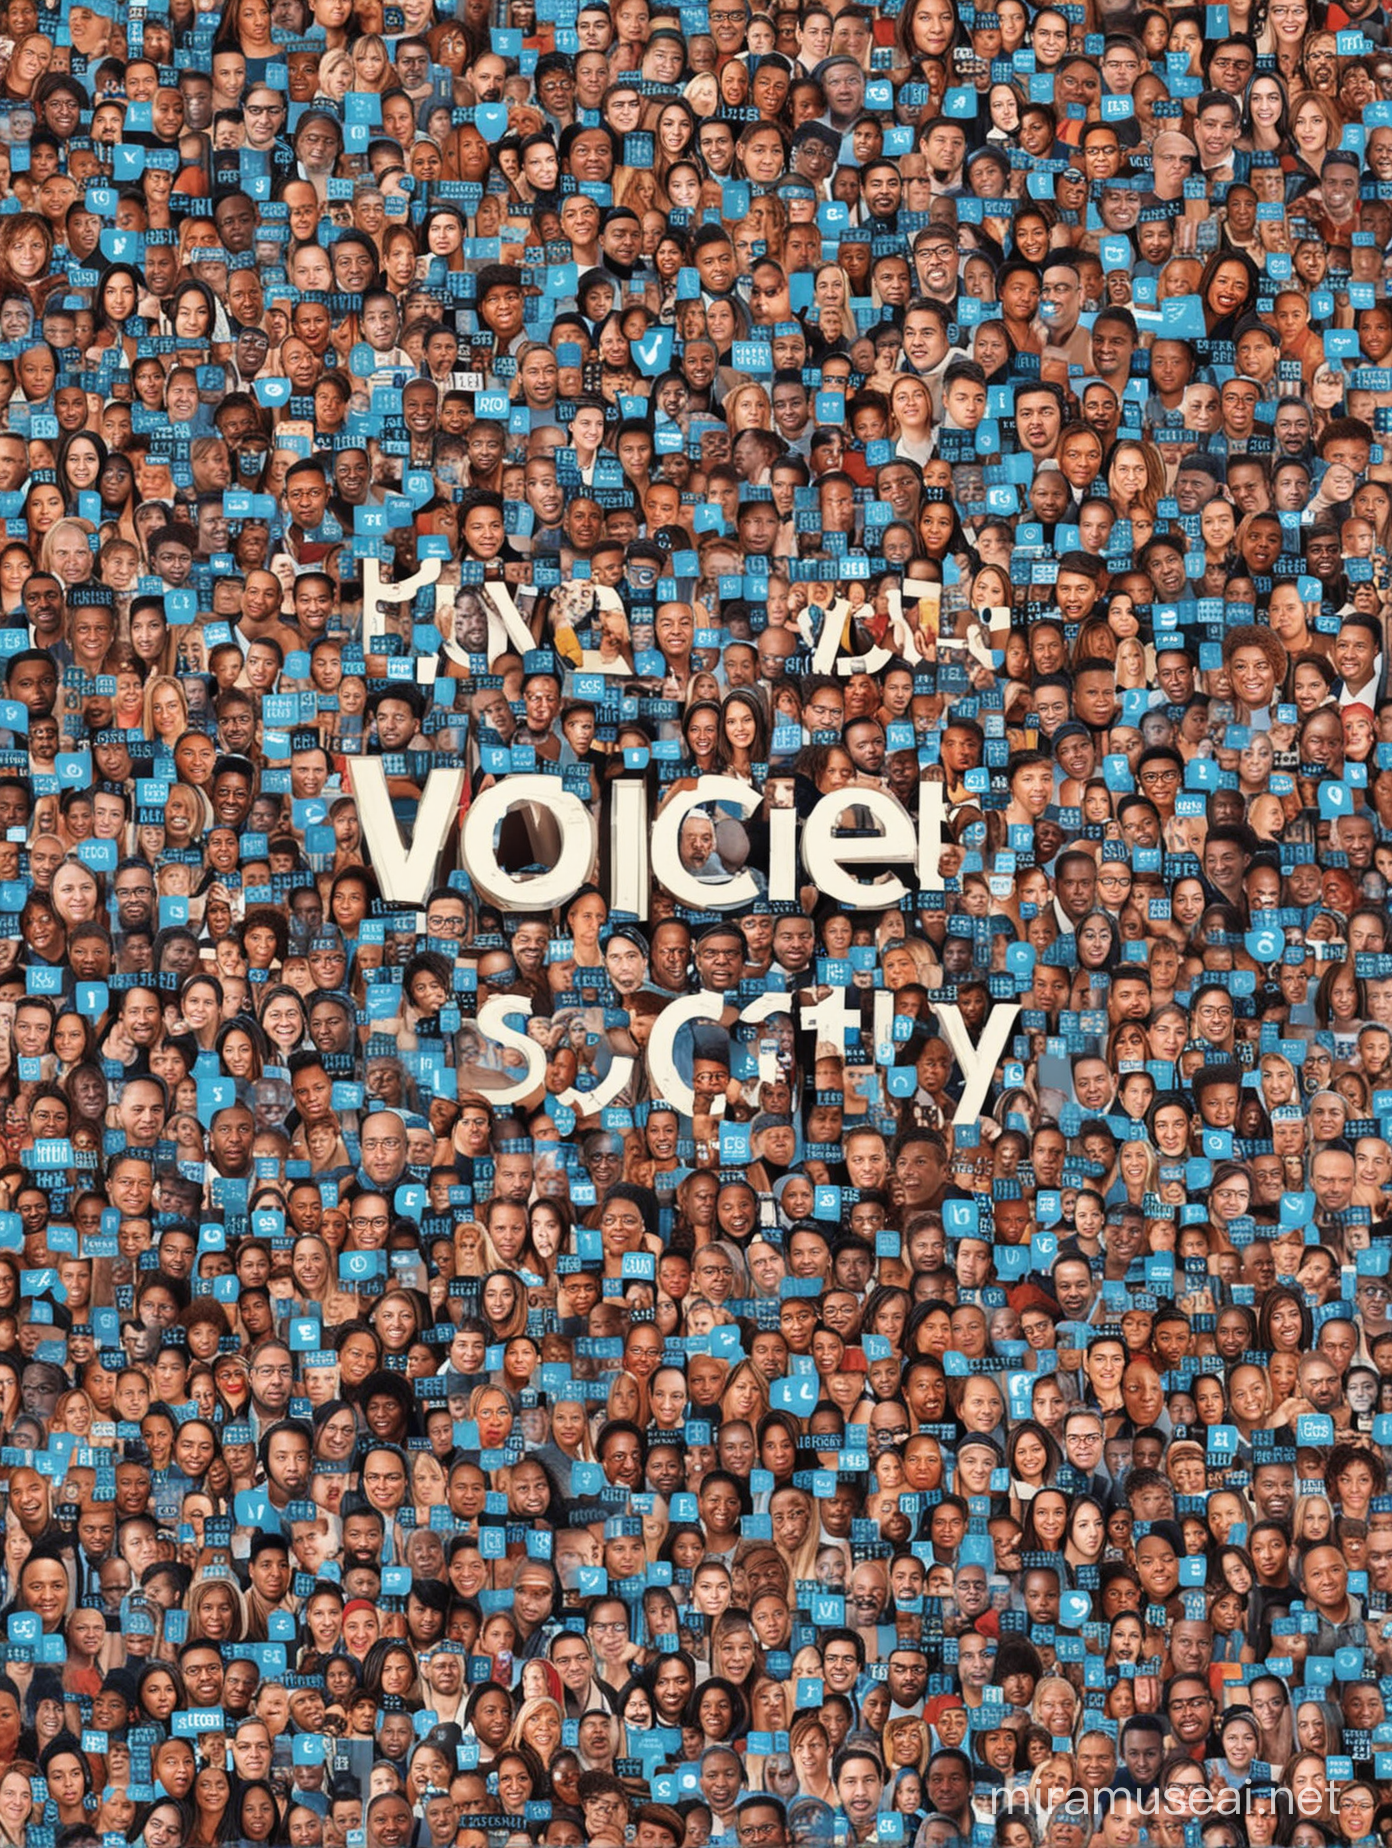 Exploring the Voices of Society. A compilation of 100 Twitter Q&As reflecting the diverse voices and insights of the digital community.